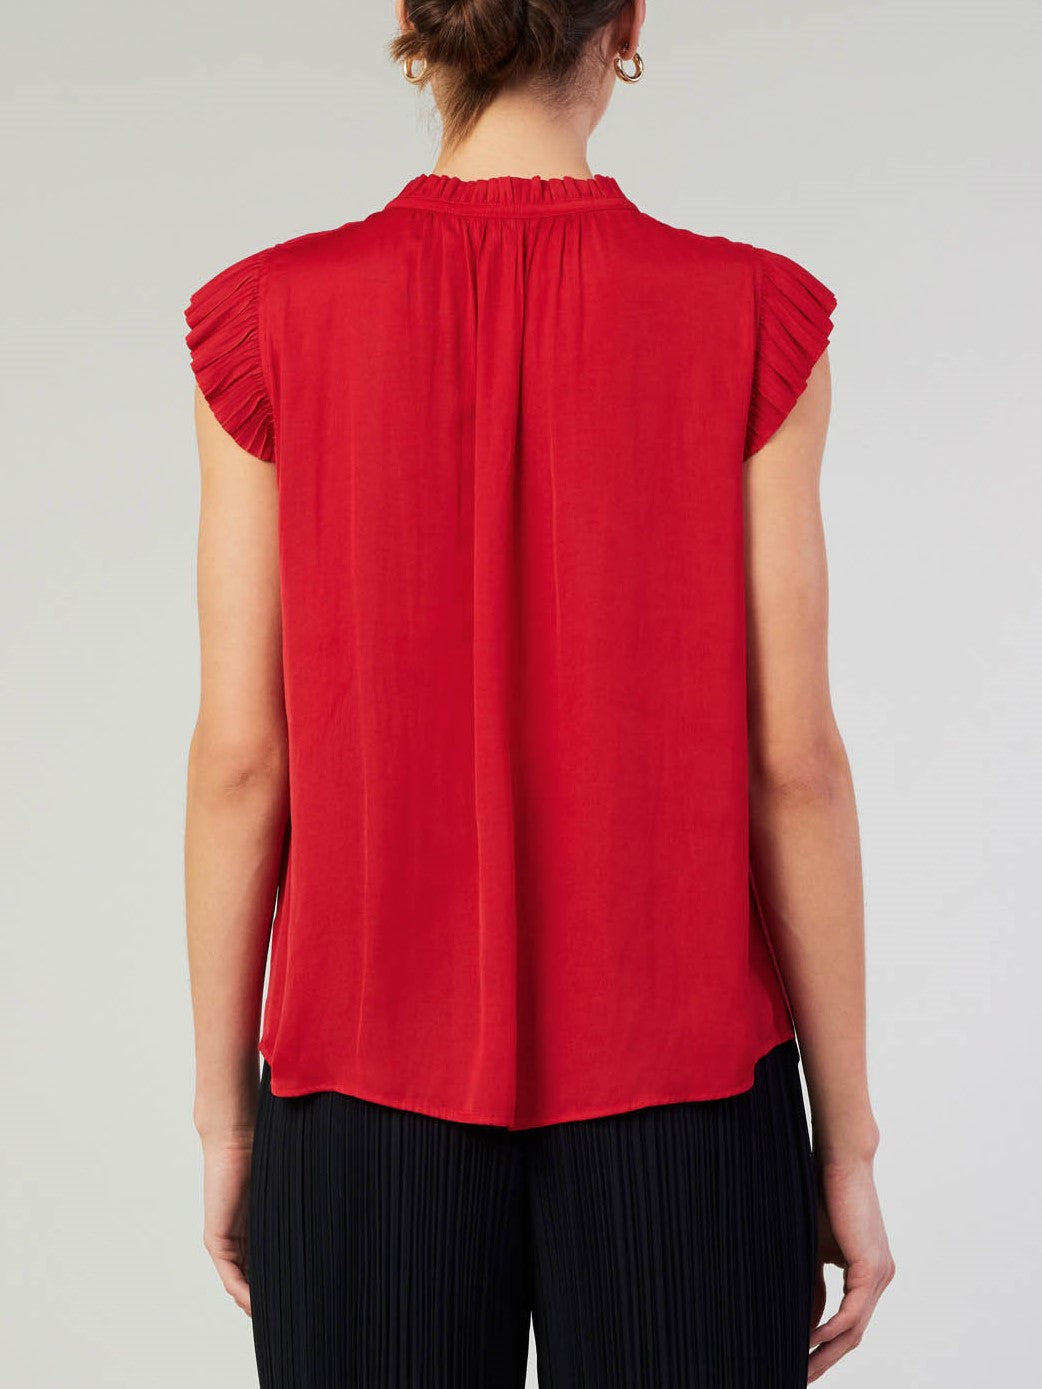 Be Bold Blouse - Red